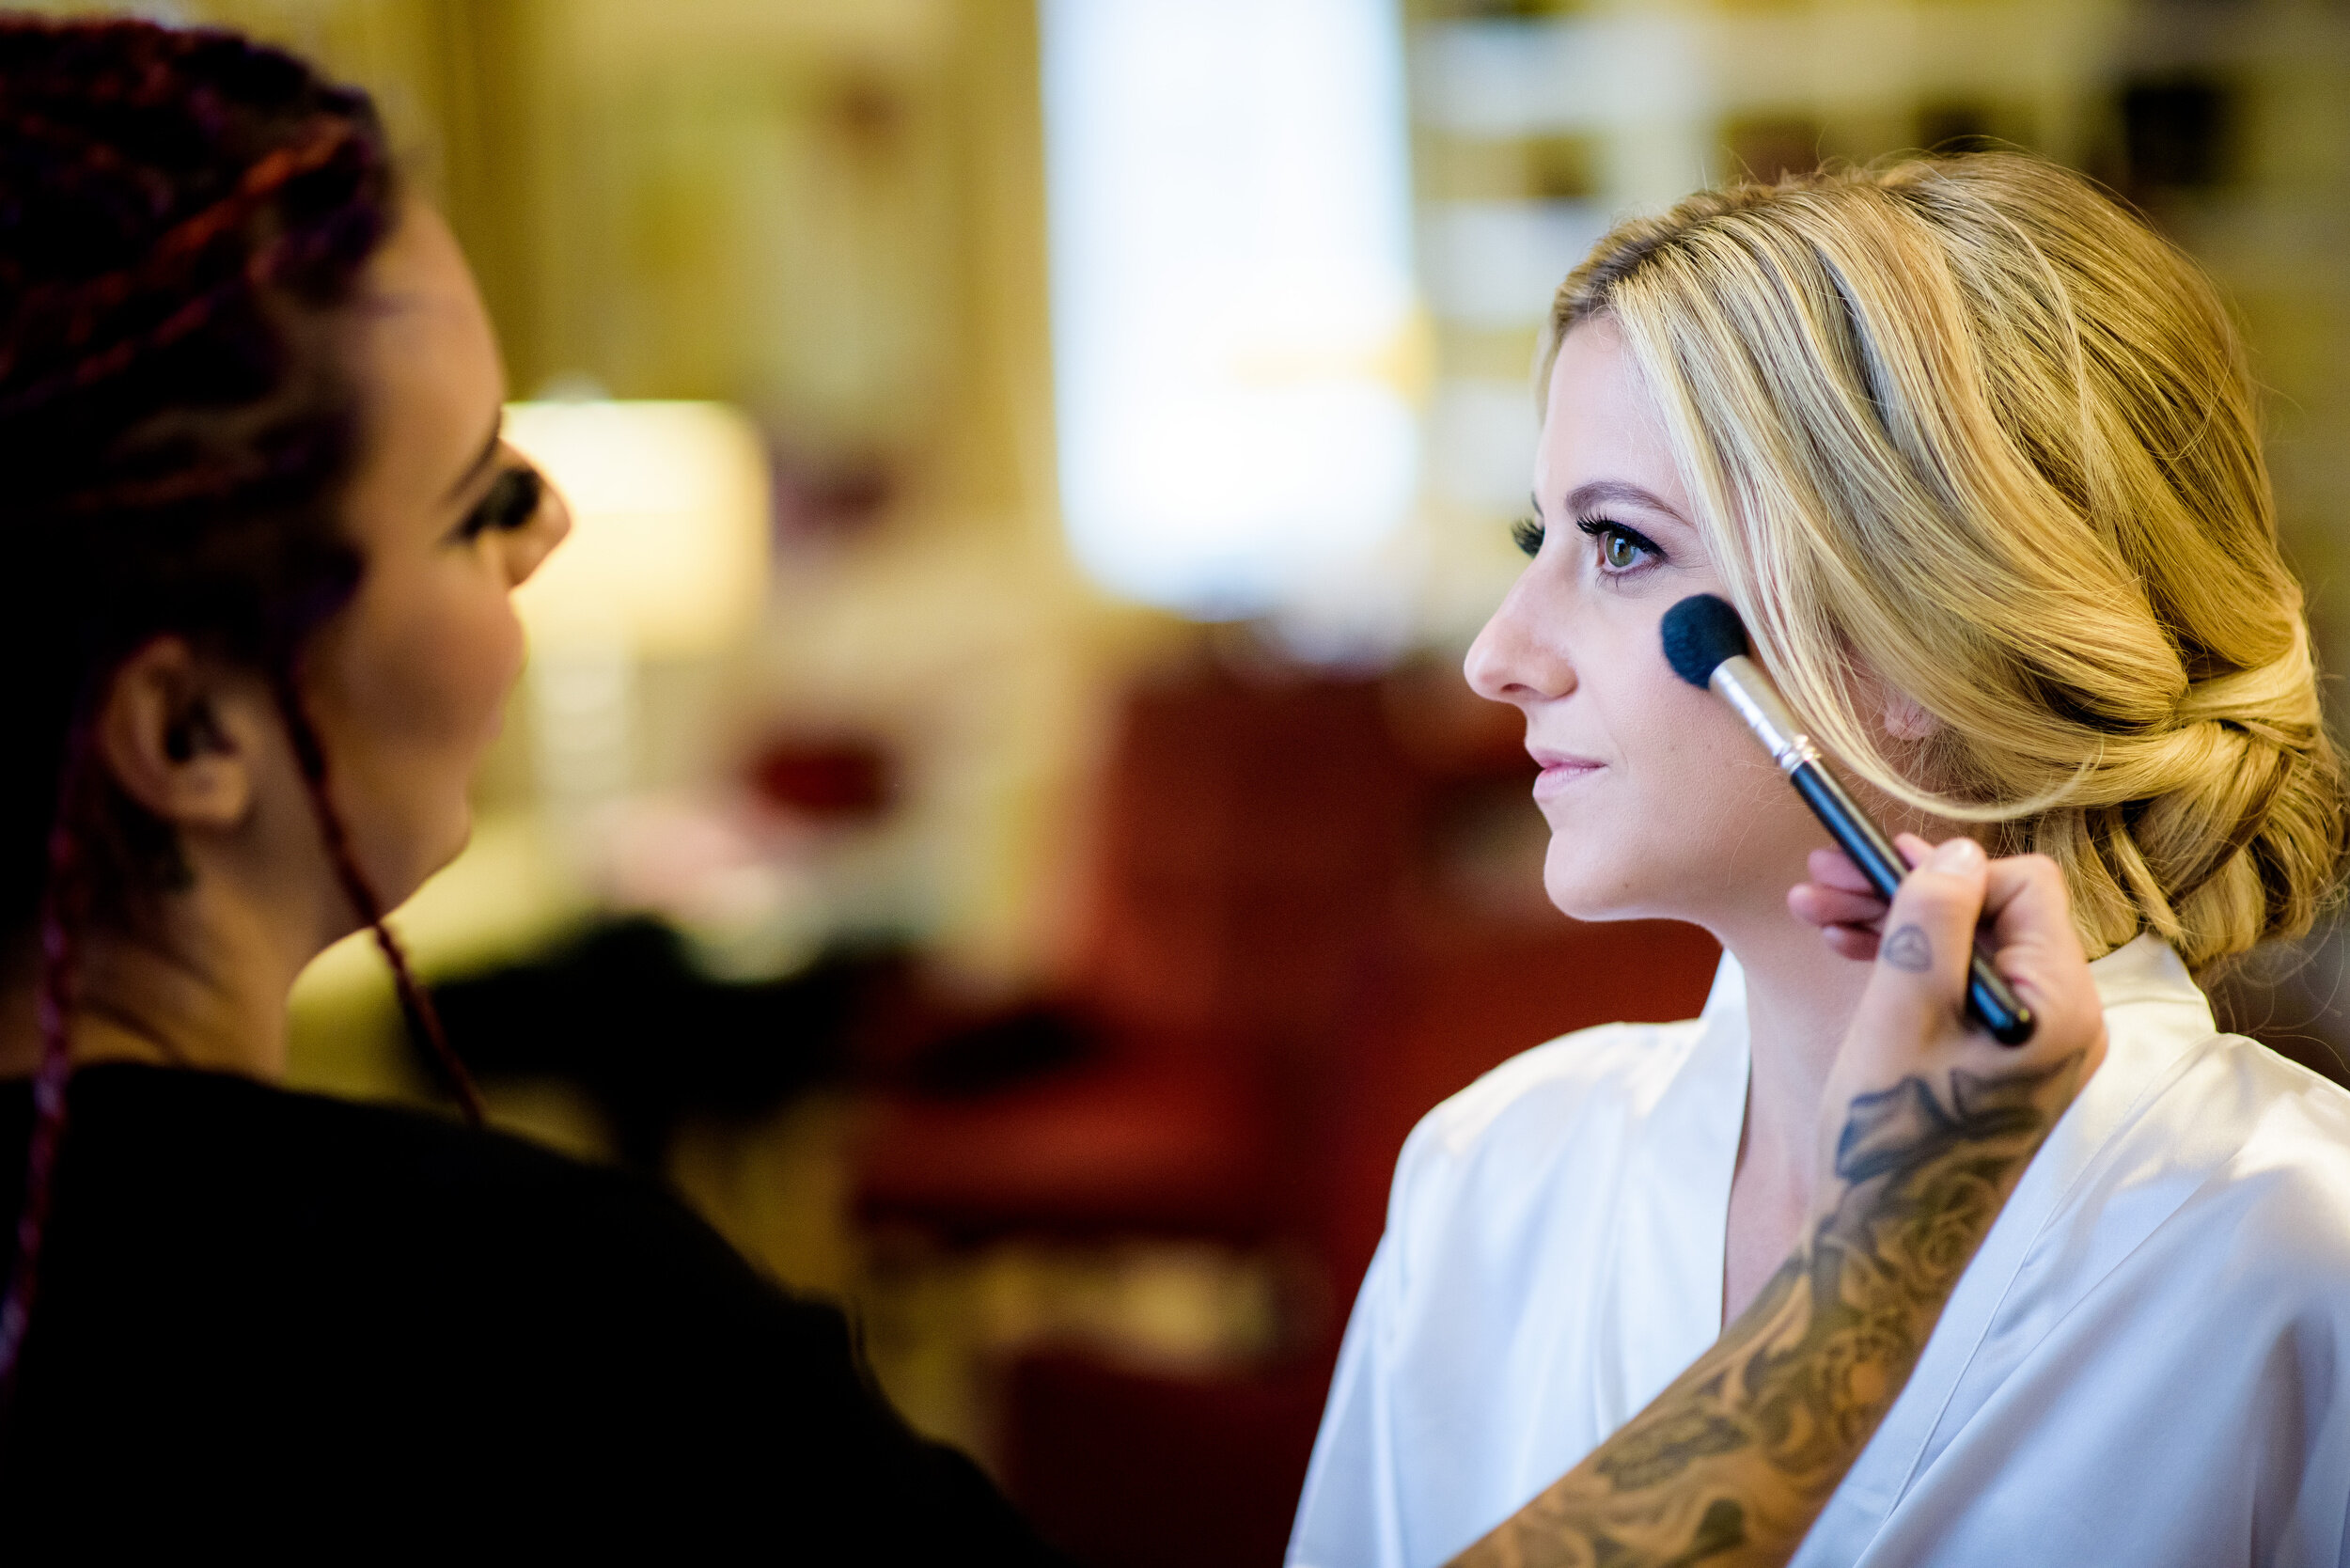 Bride getting ready at the JW Marriott: Geraghty Chicago wedding photography captured by J. Brown Photography.